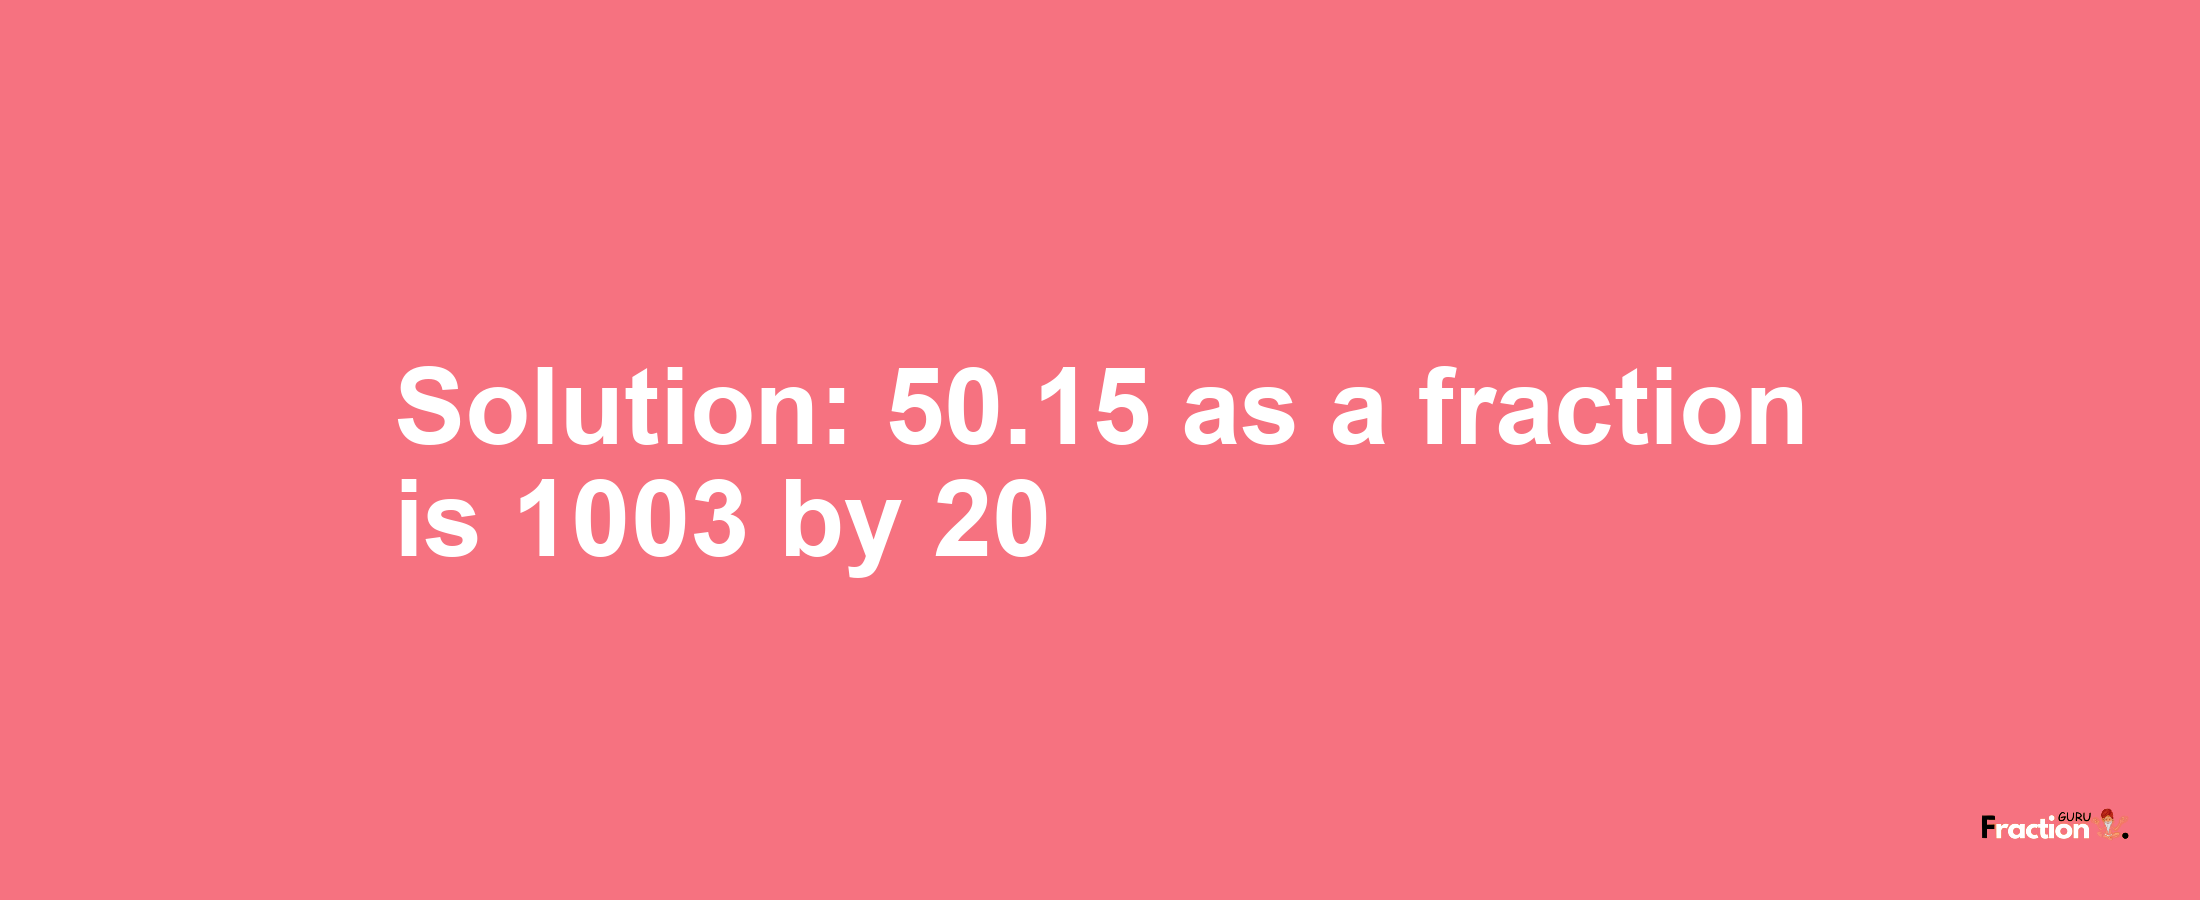 Solution:50.15 as a fraction is 1003/20